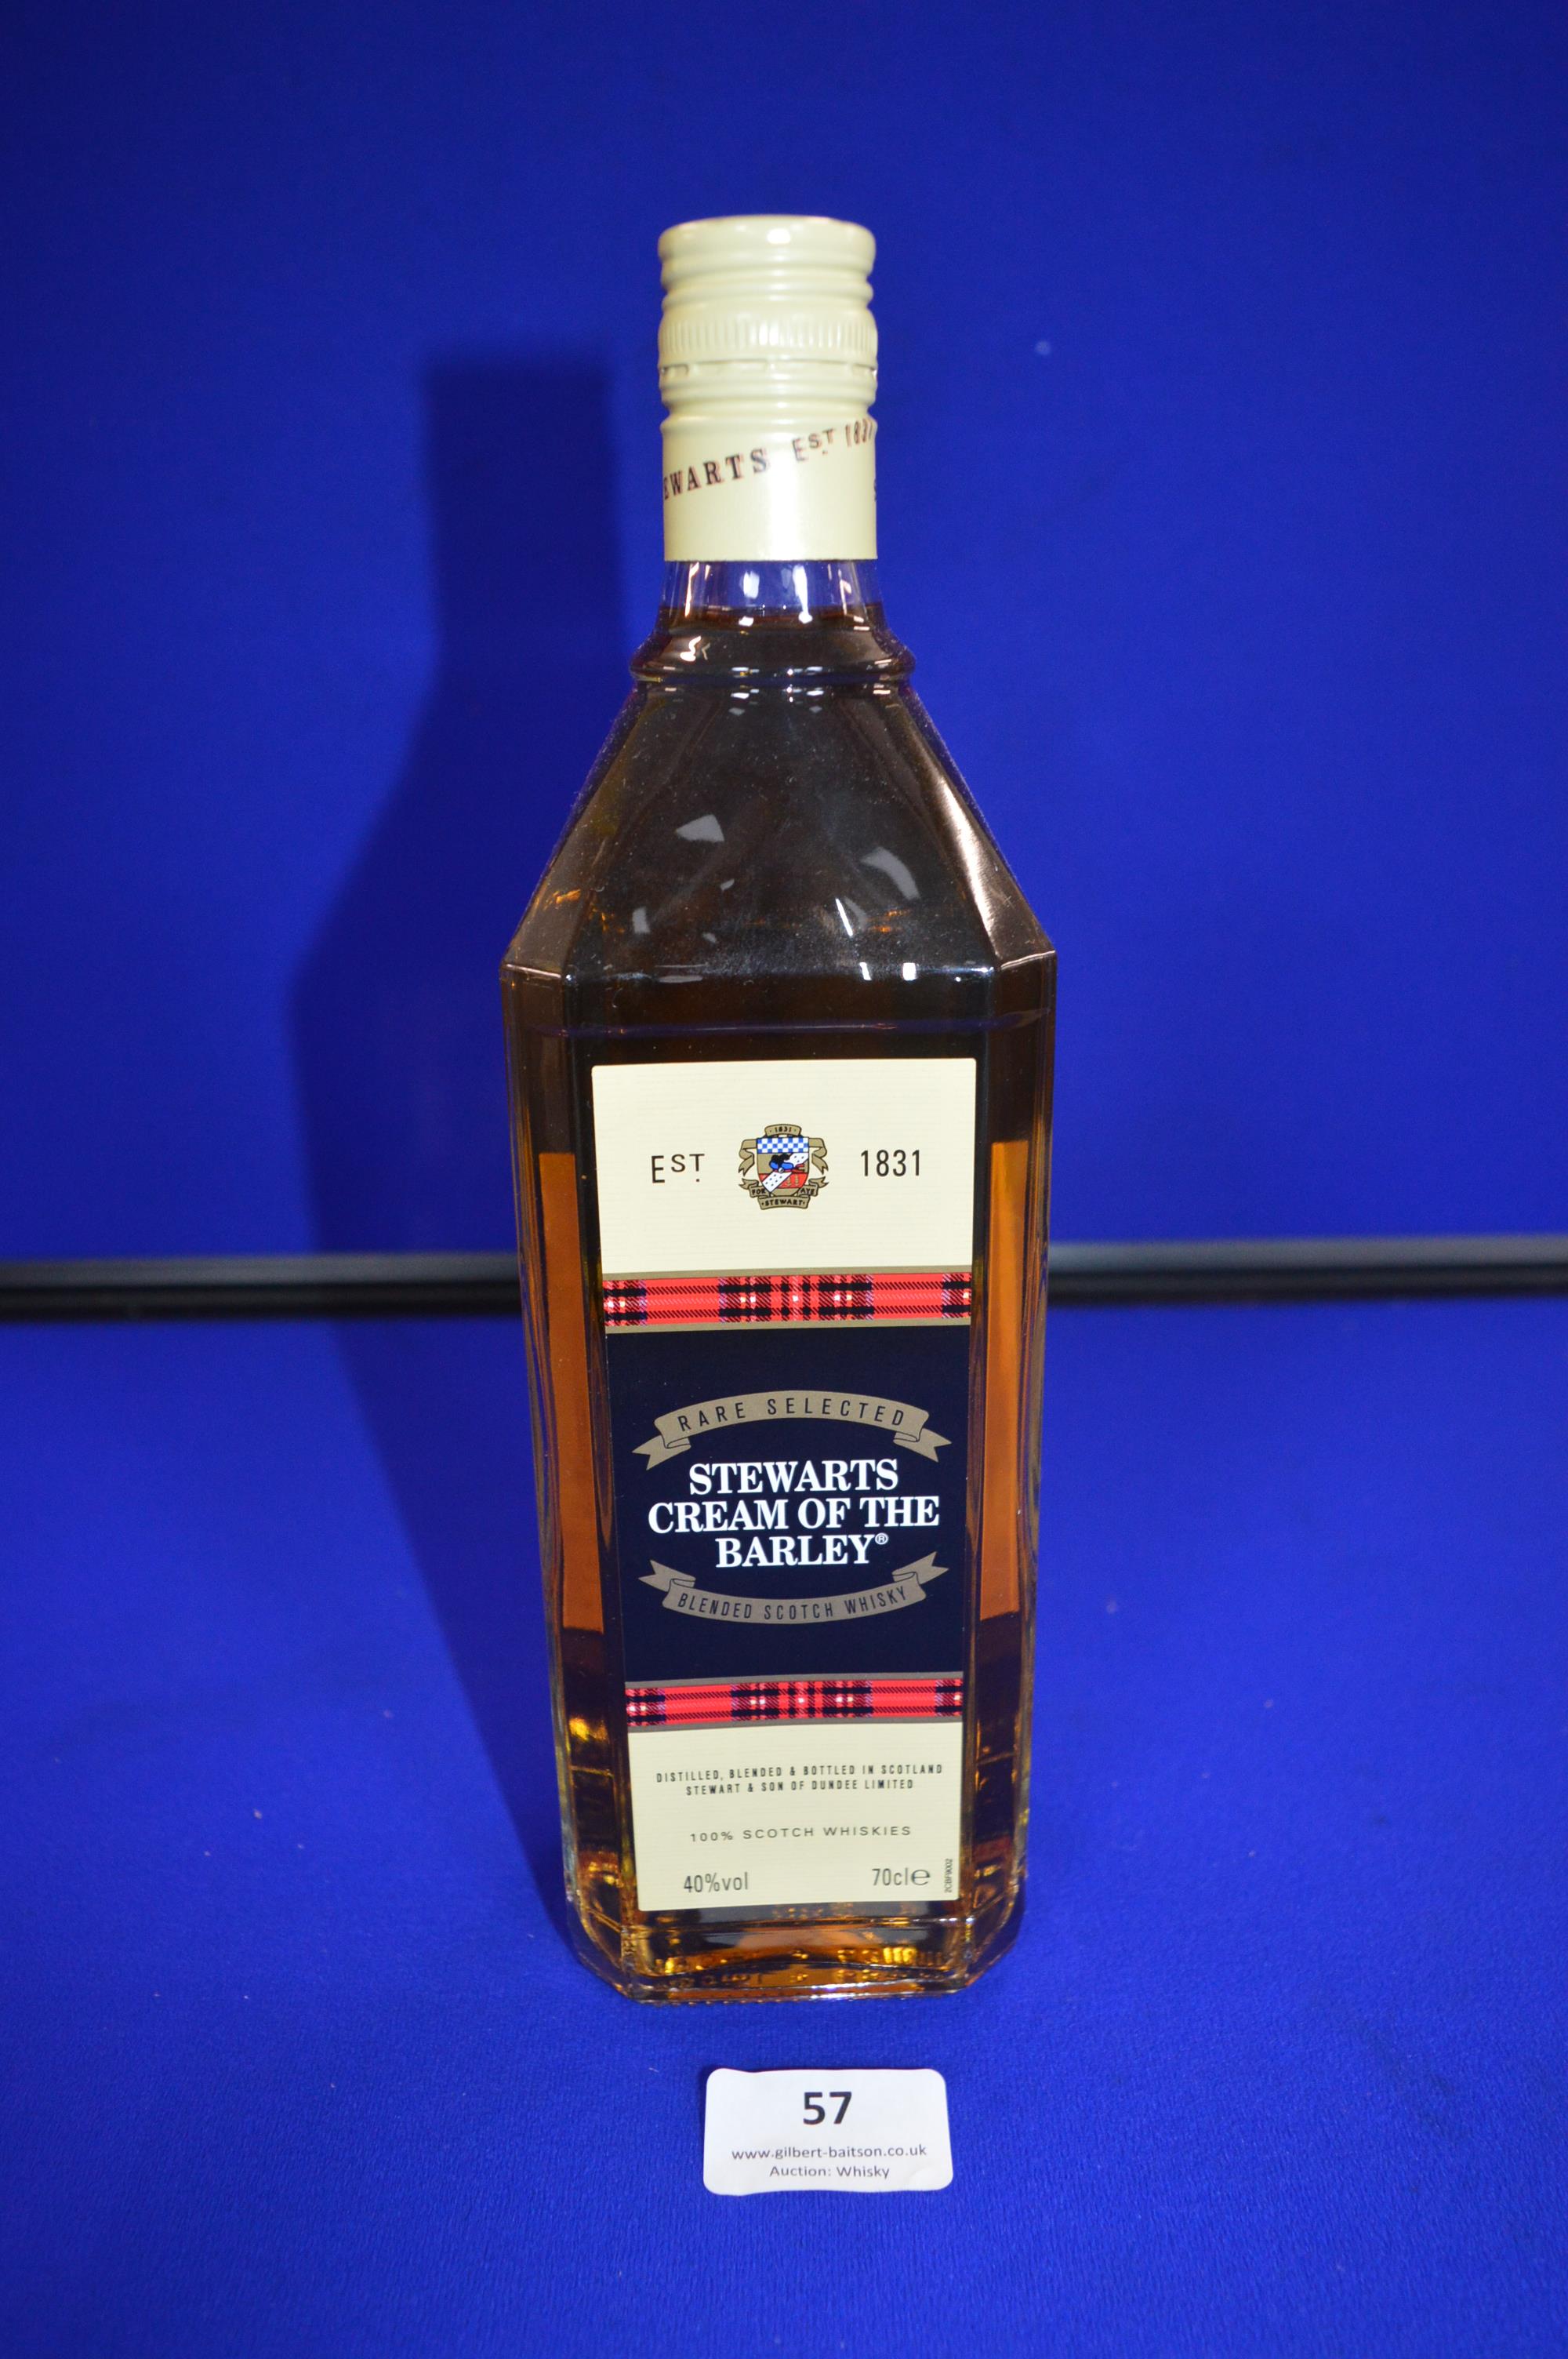 Stewarts Cream of the Barley Blended Scotch Whisky